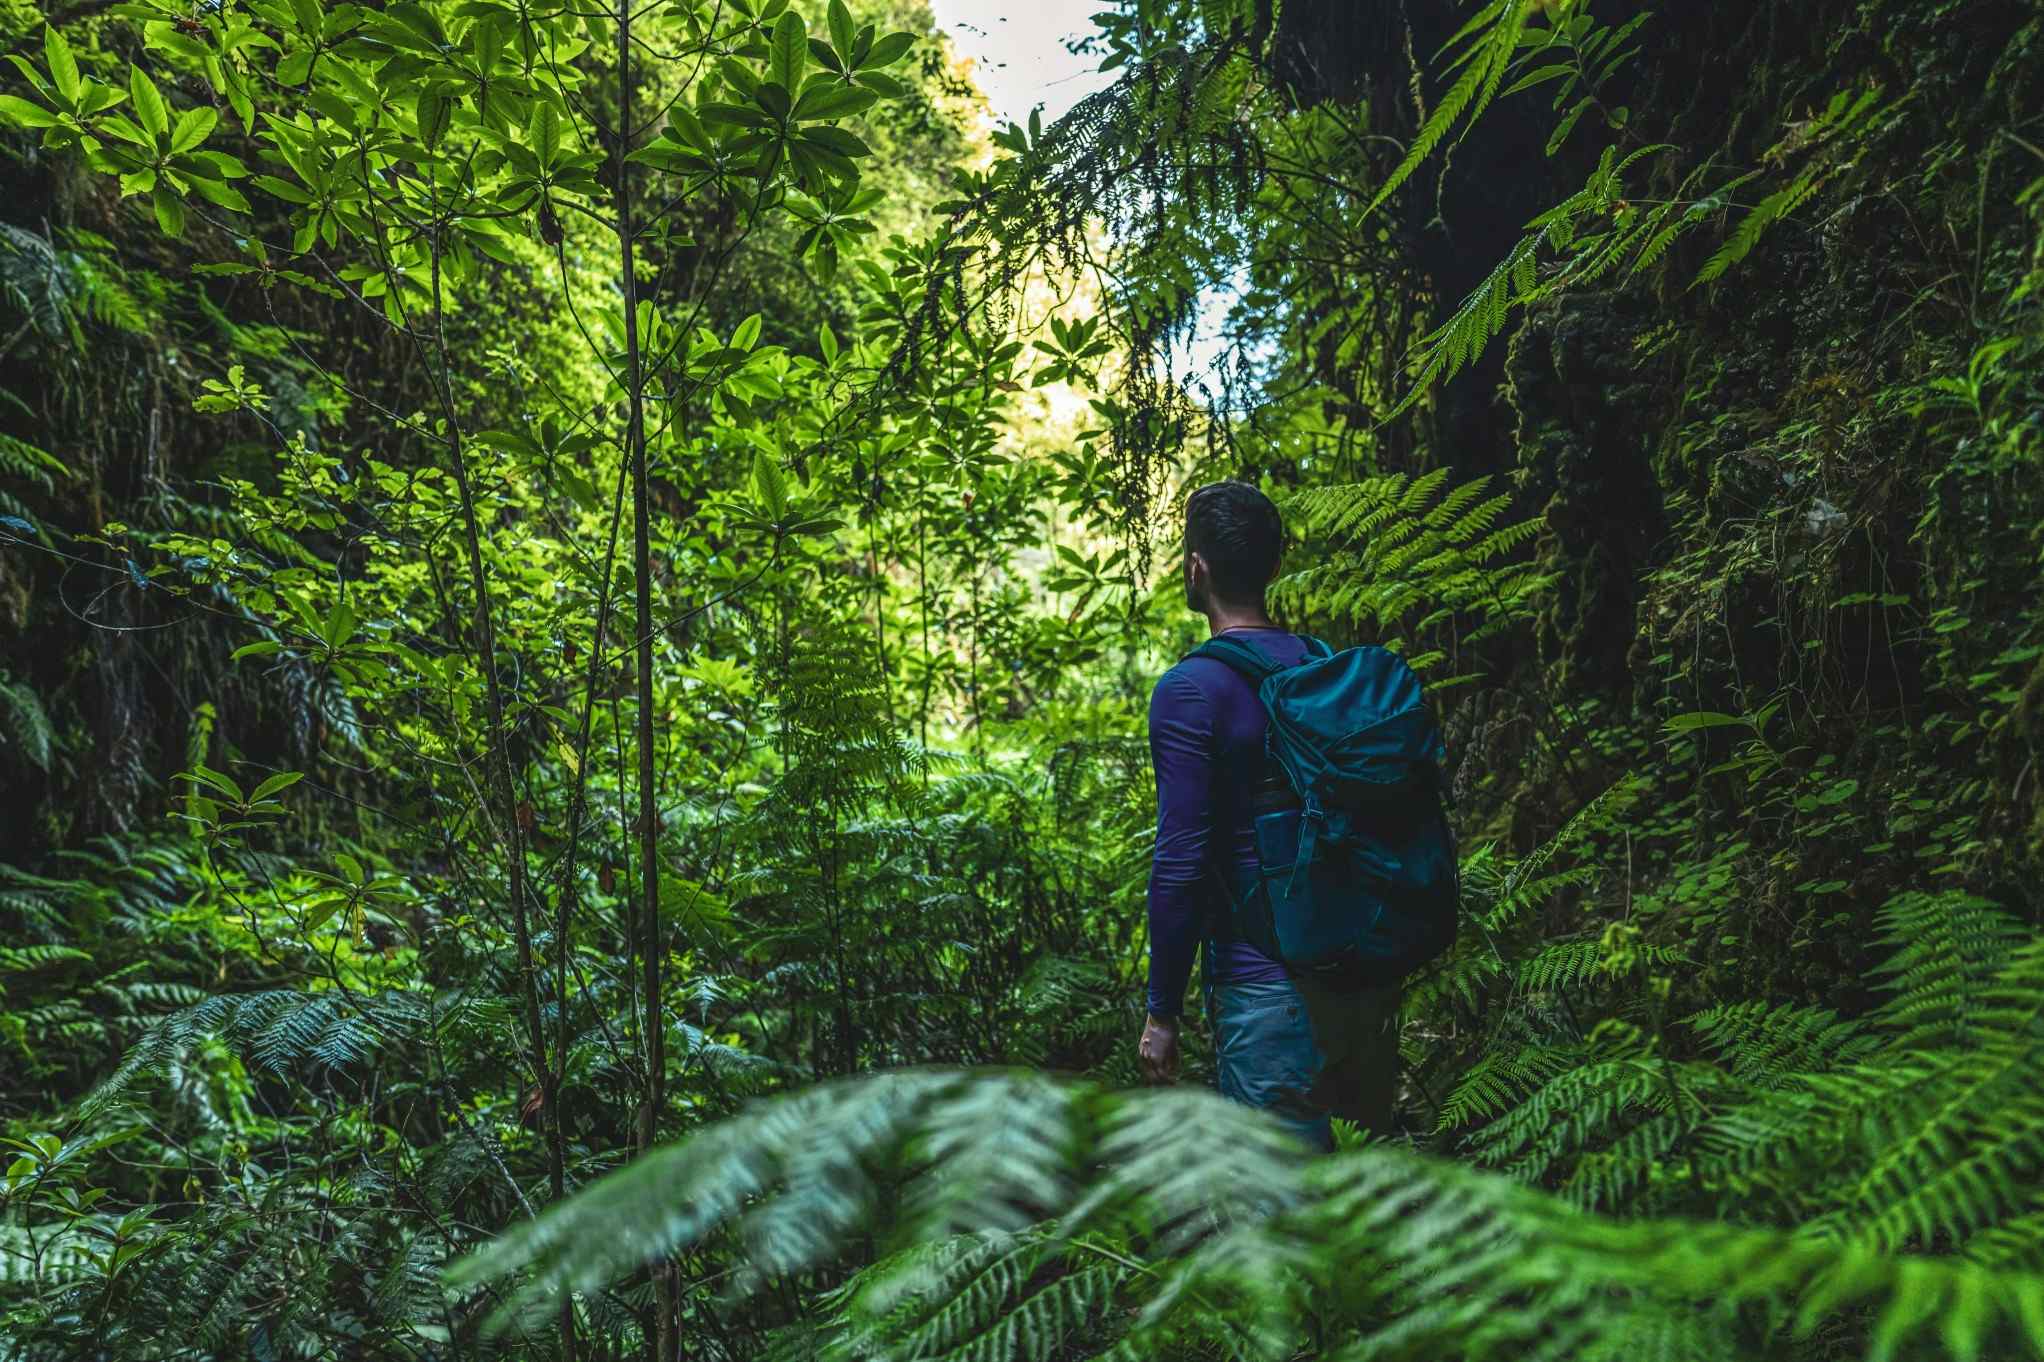 Hiker surrounded by lush, green forest, Costa Rica